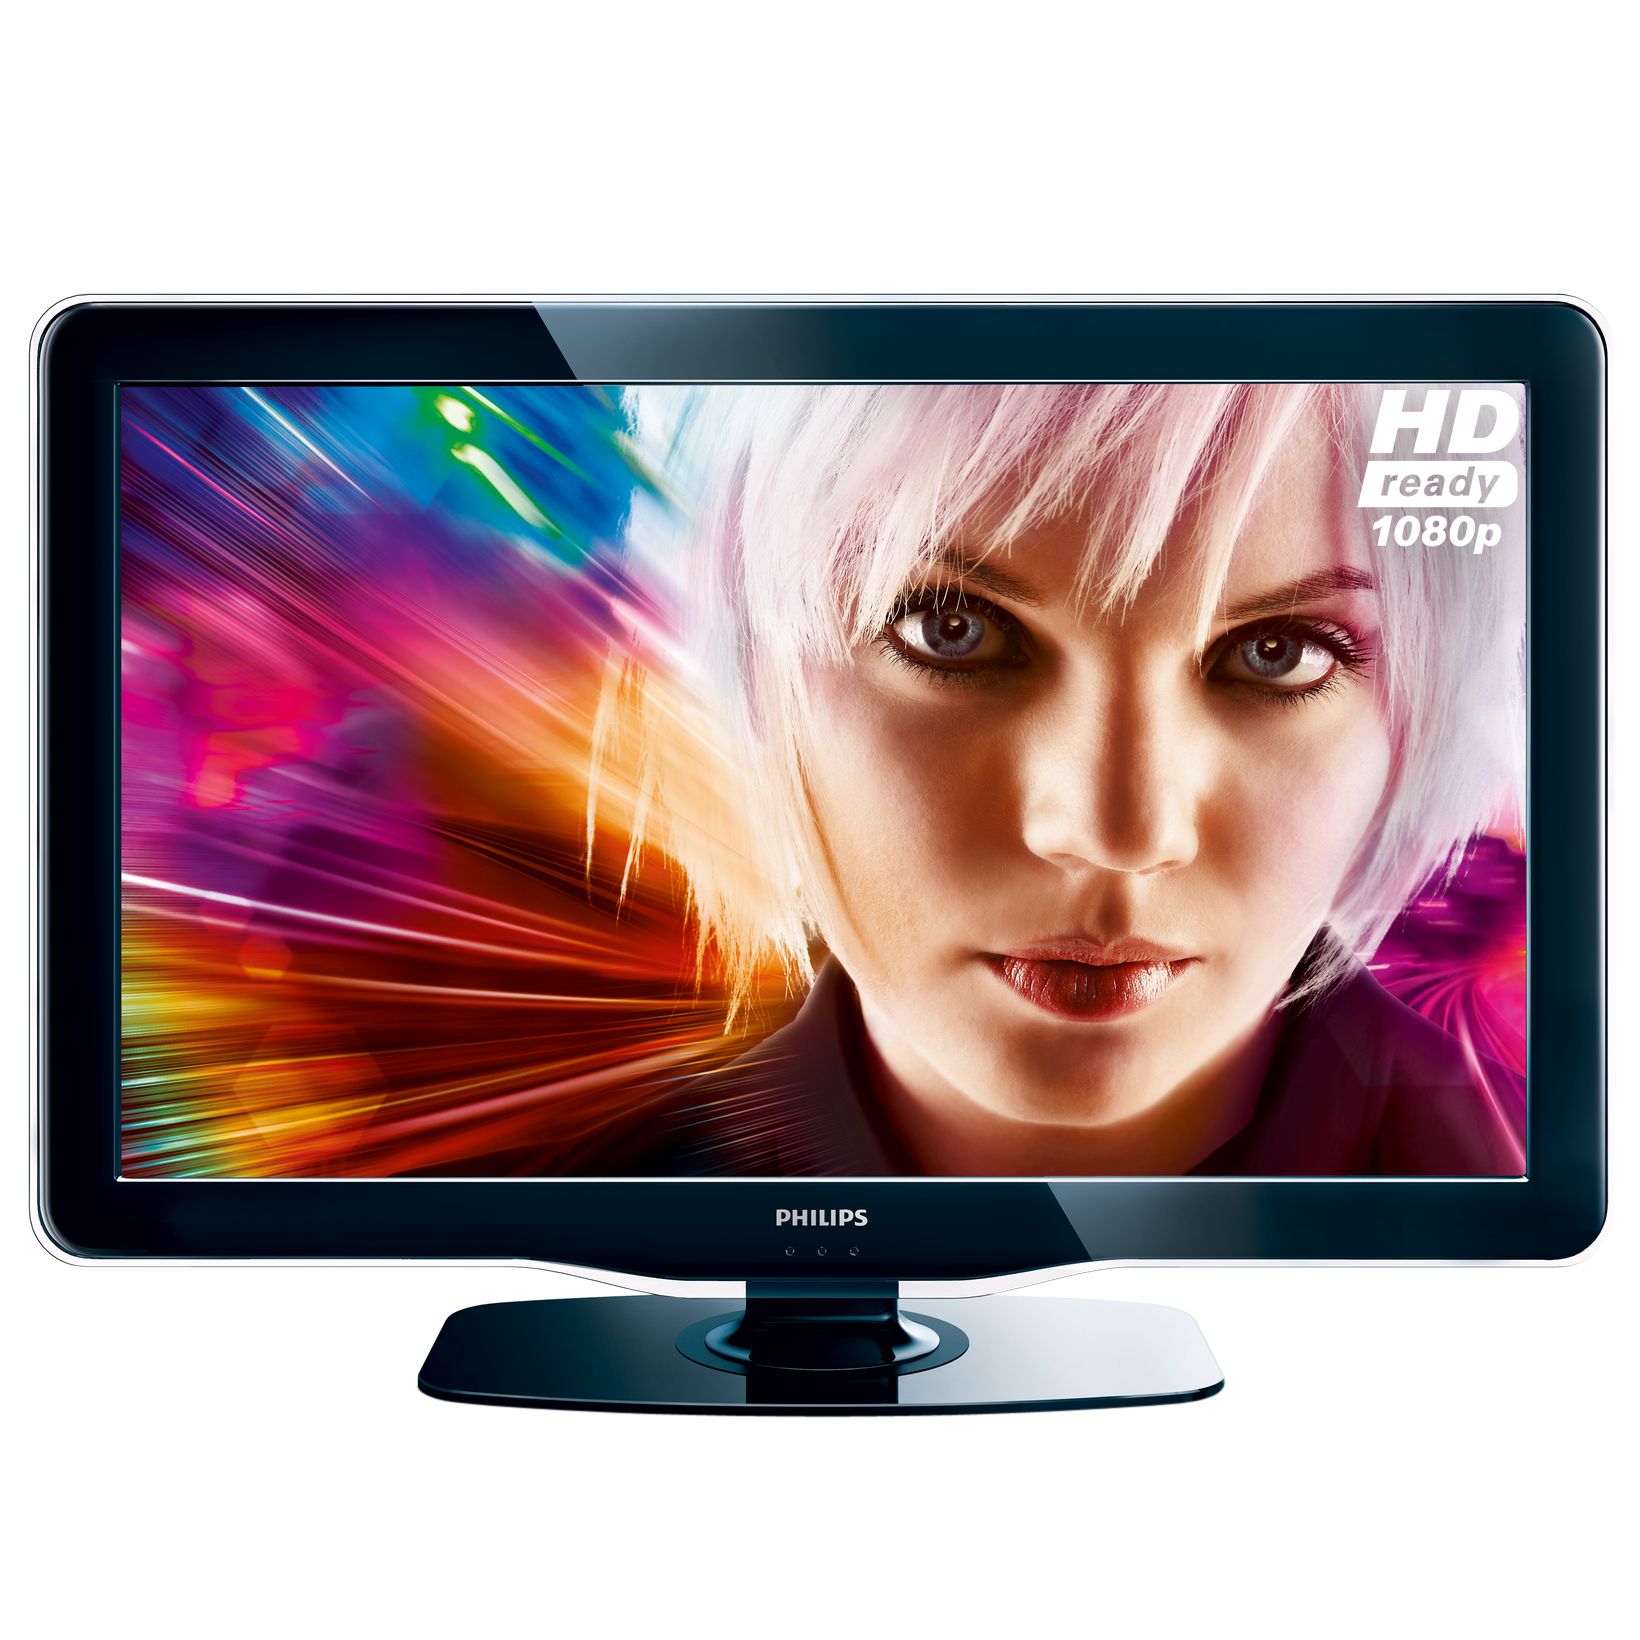 Philips 46PFL7605H/05 LCD/LED HD 1080p Digital Television, 46 Inch at JohnLewis